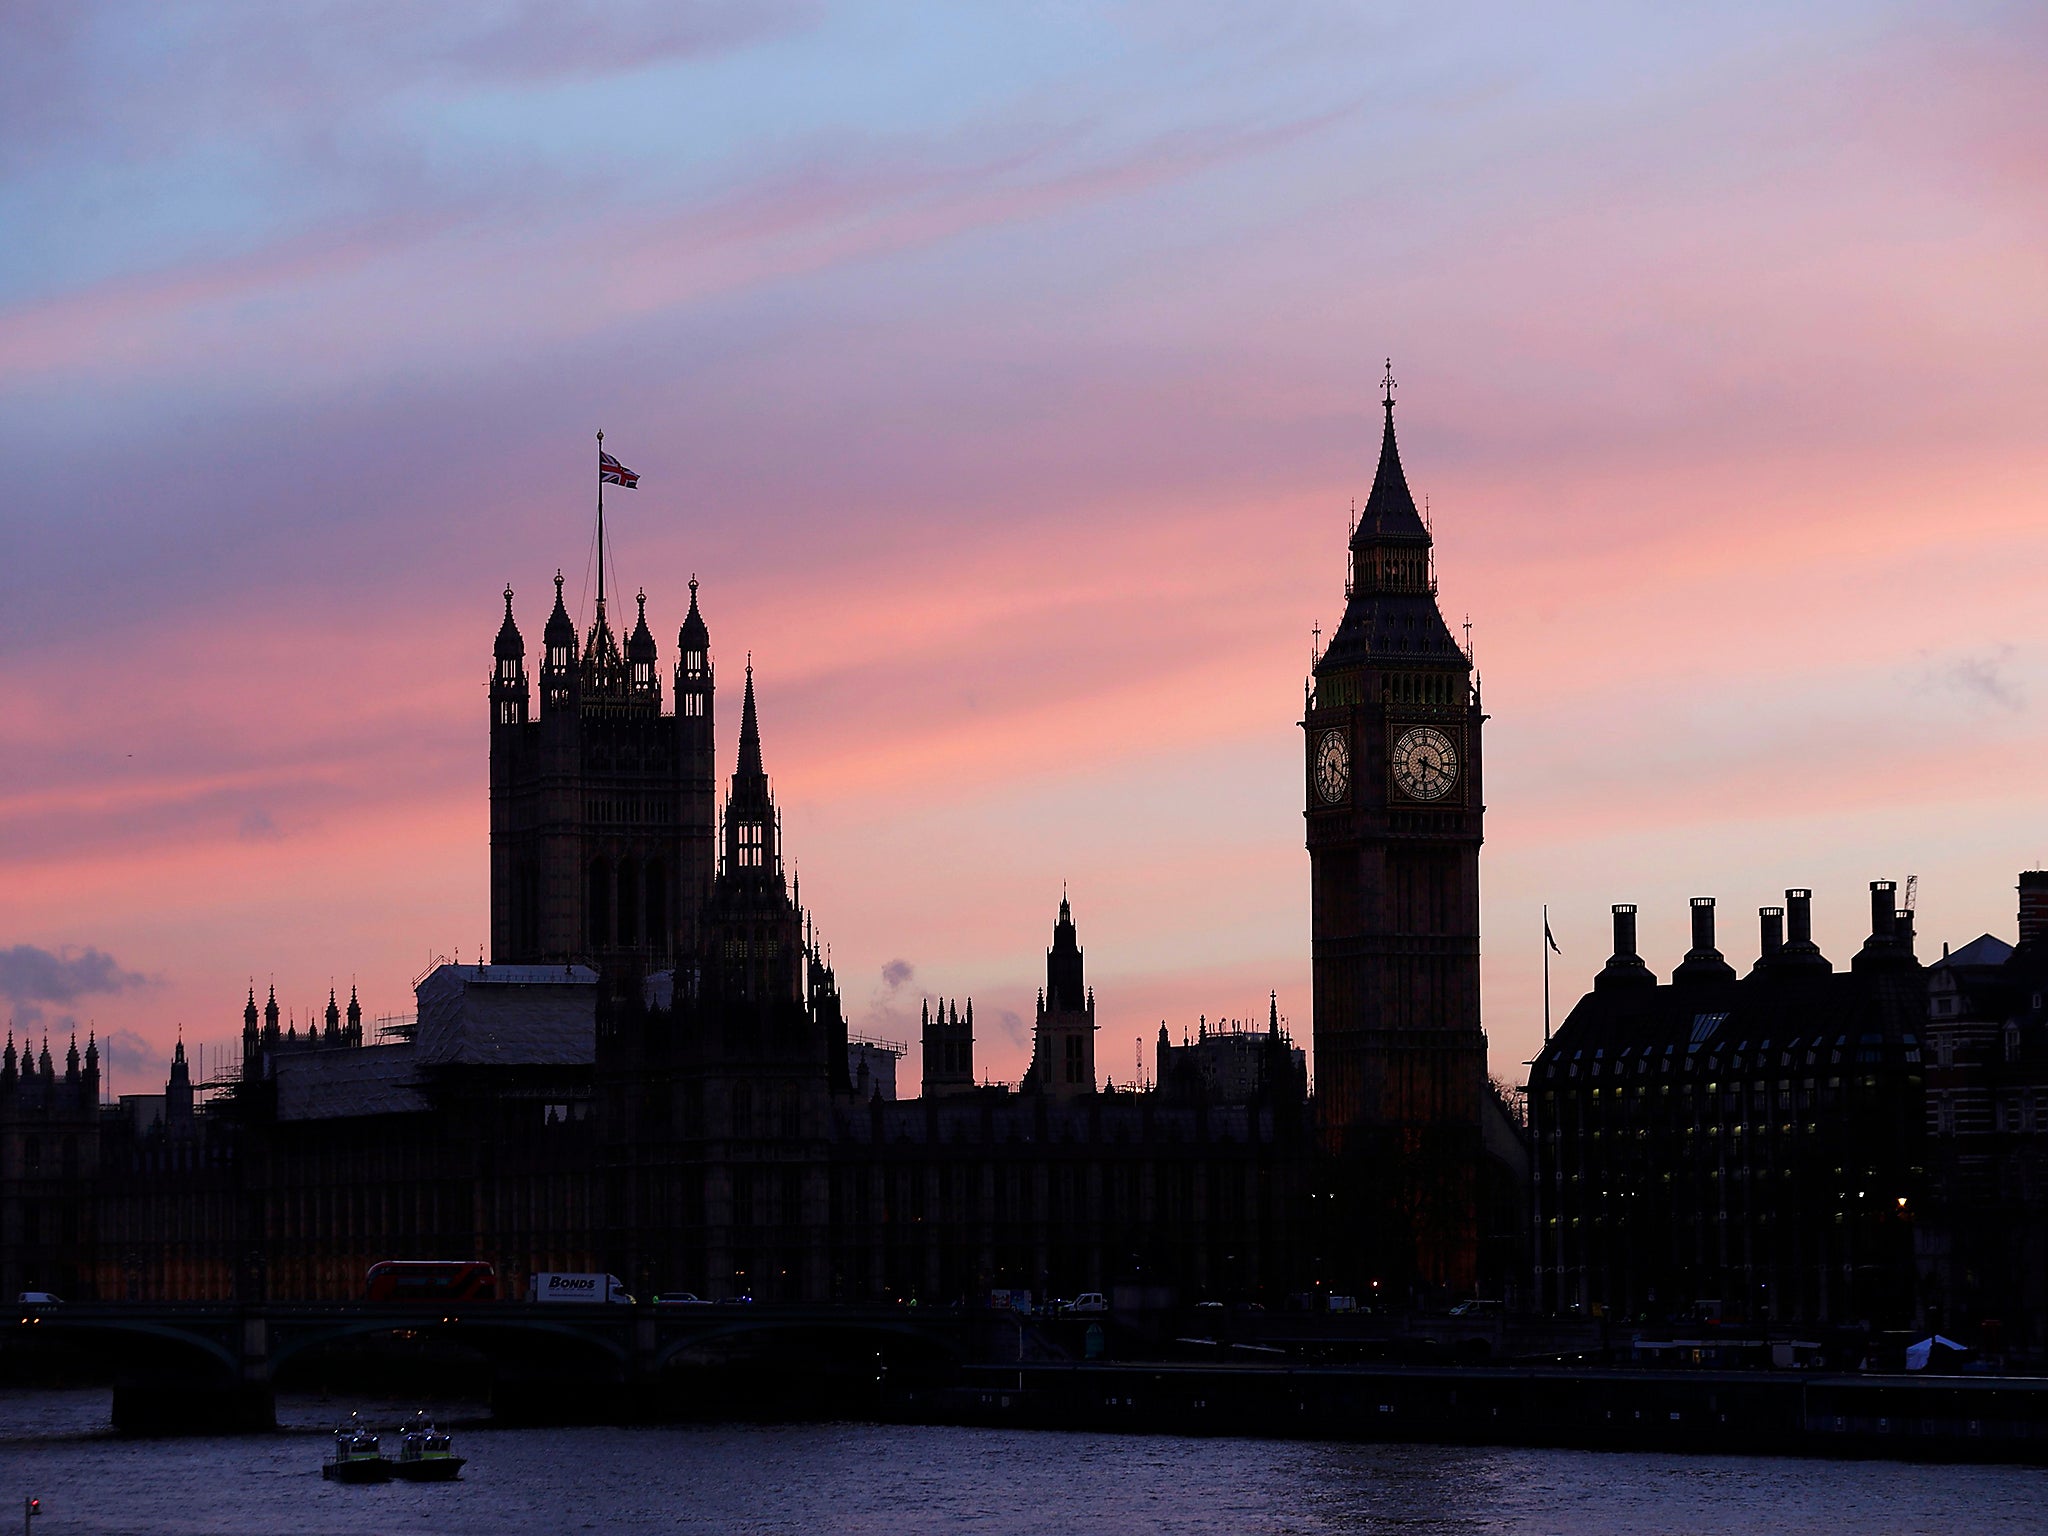 The sun sets behind the Houses of Parliament after an attack on Westminster Bridge in London